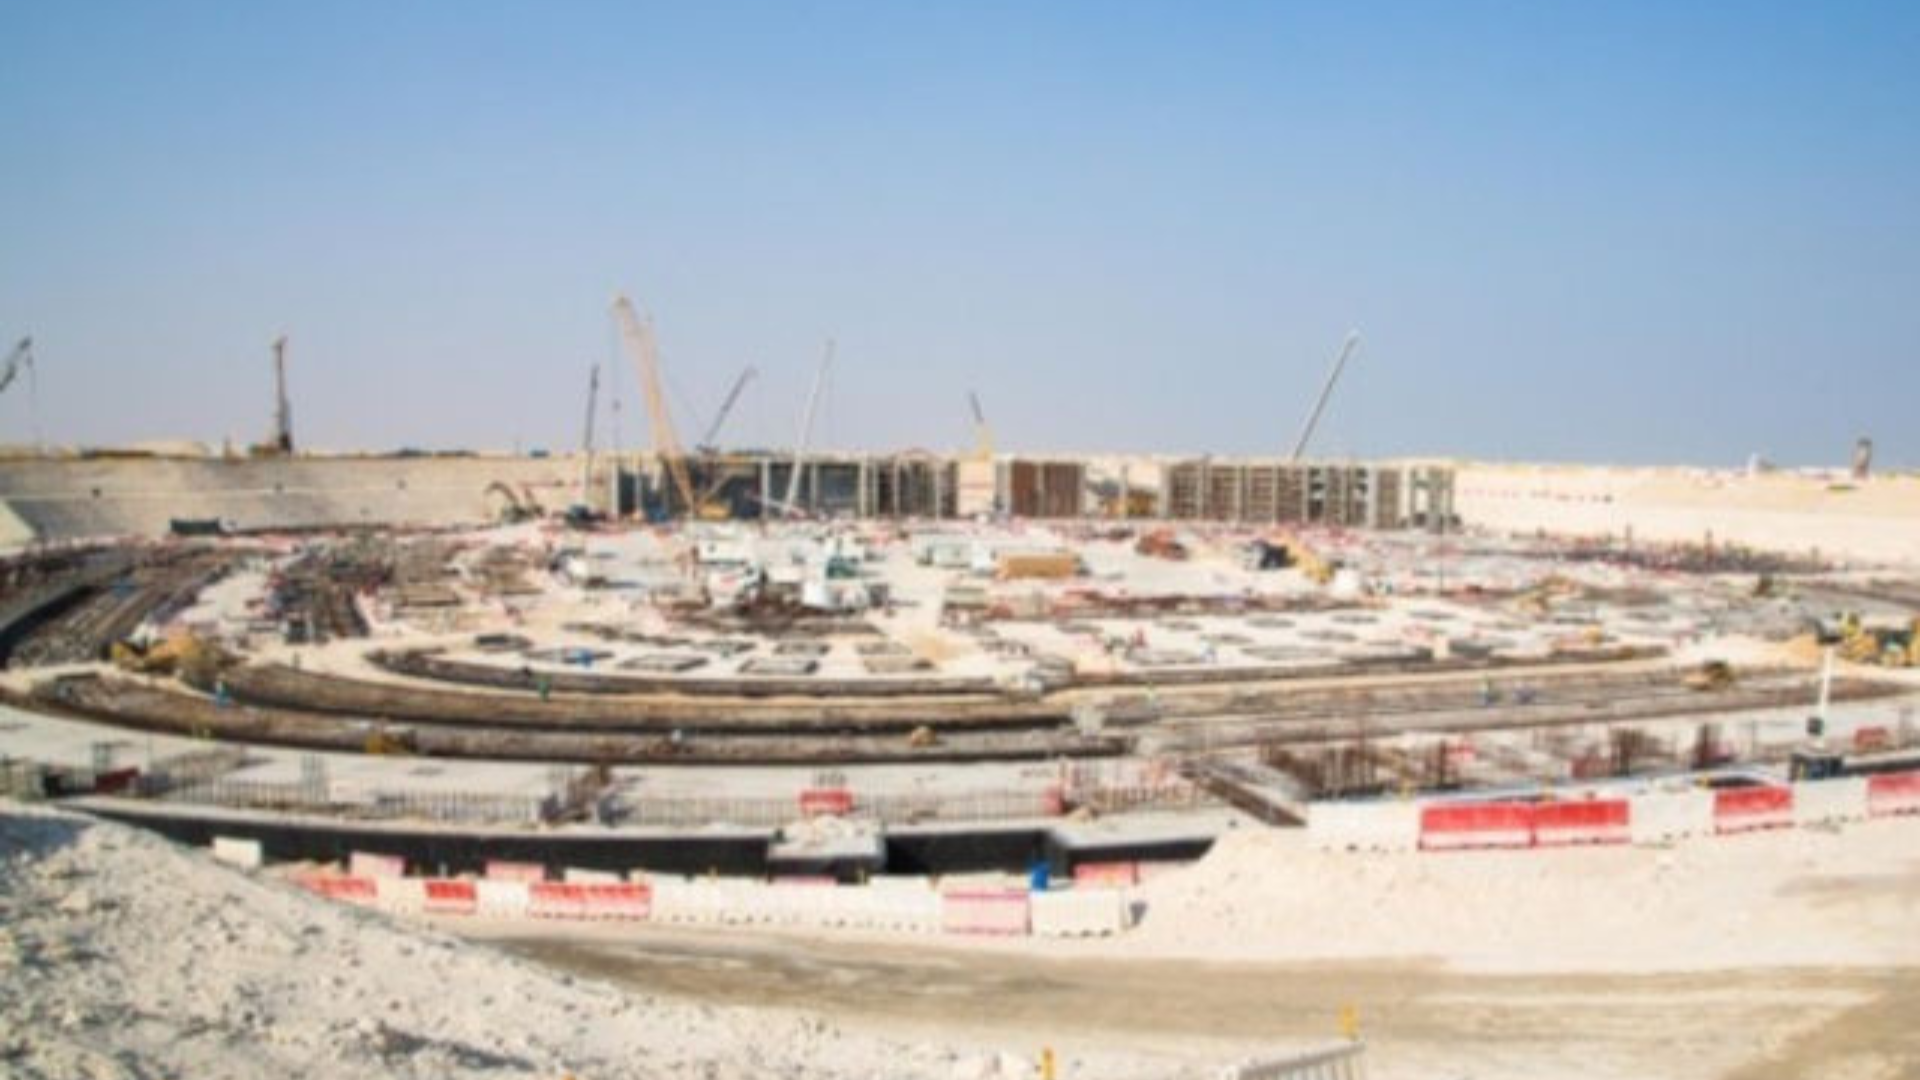 The MB-S18 screening bucket at work at the Al Furousiya Street construction site in Doha